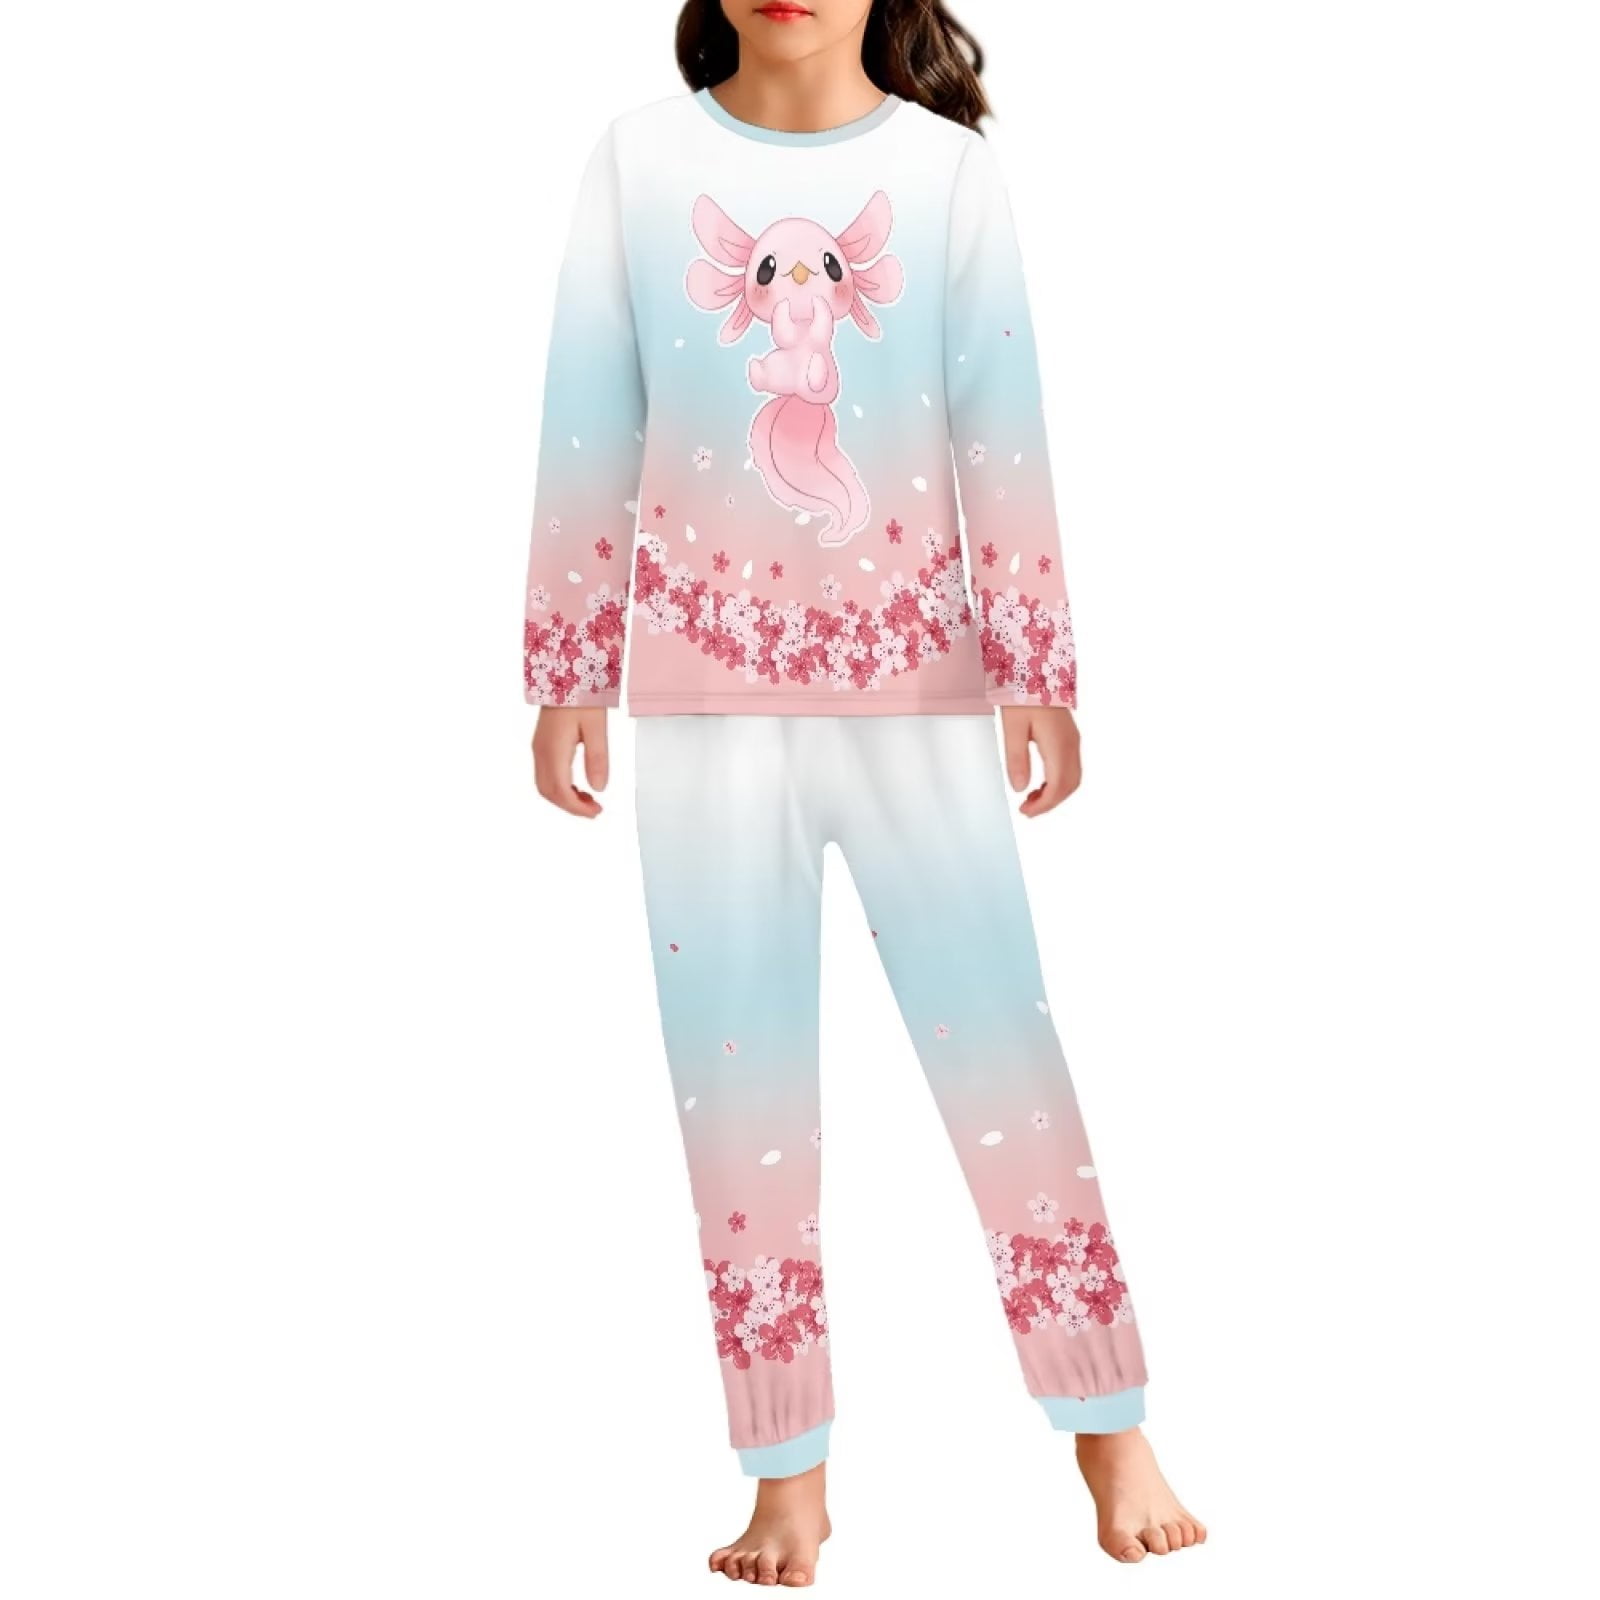 Renewold Kids Durable Pajamas Set 2 Pieces Cherry Blossom Axolotl Pjs Top  Blue Pink Lounge Wear Thermal Scoop Neck Sleepwear Athletic Clothing Size  7-8 